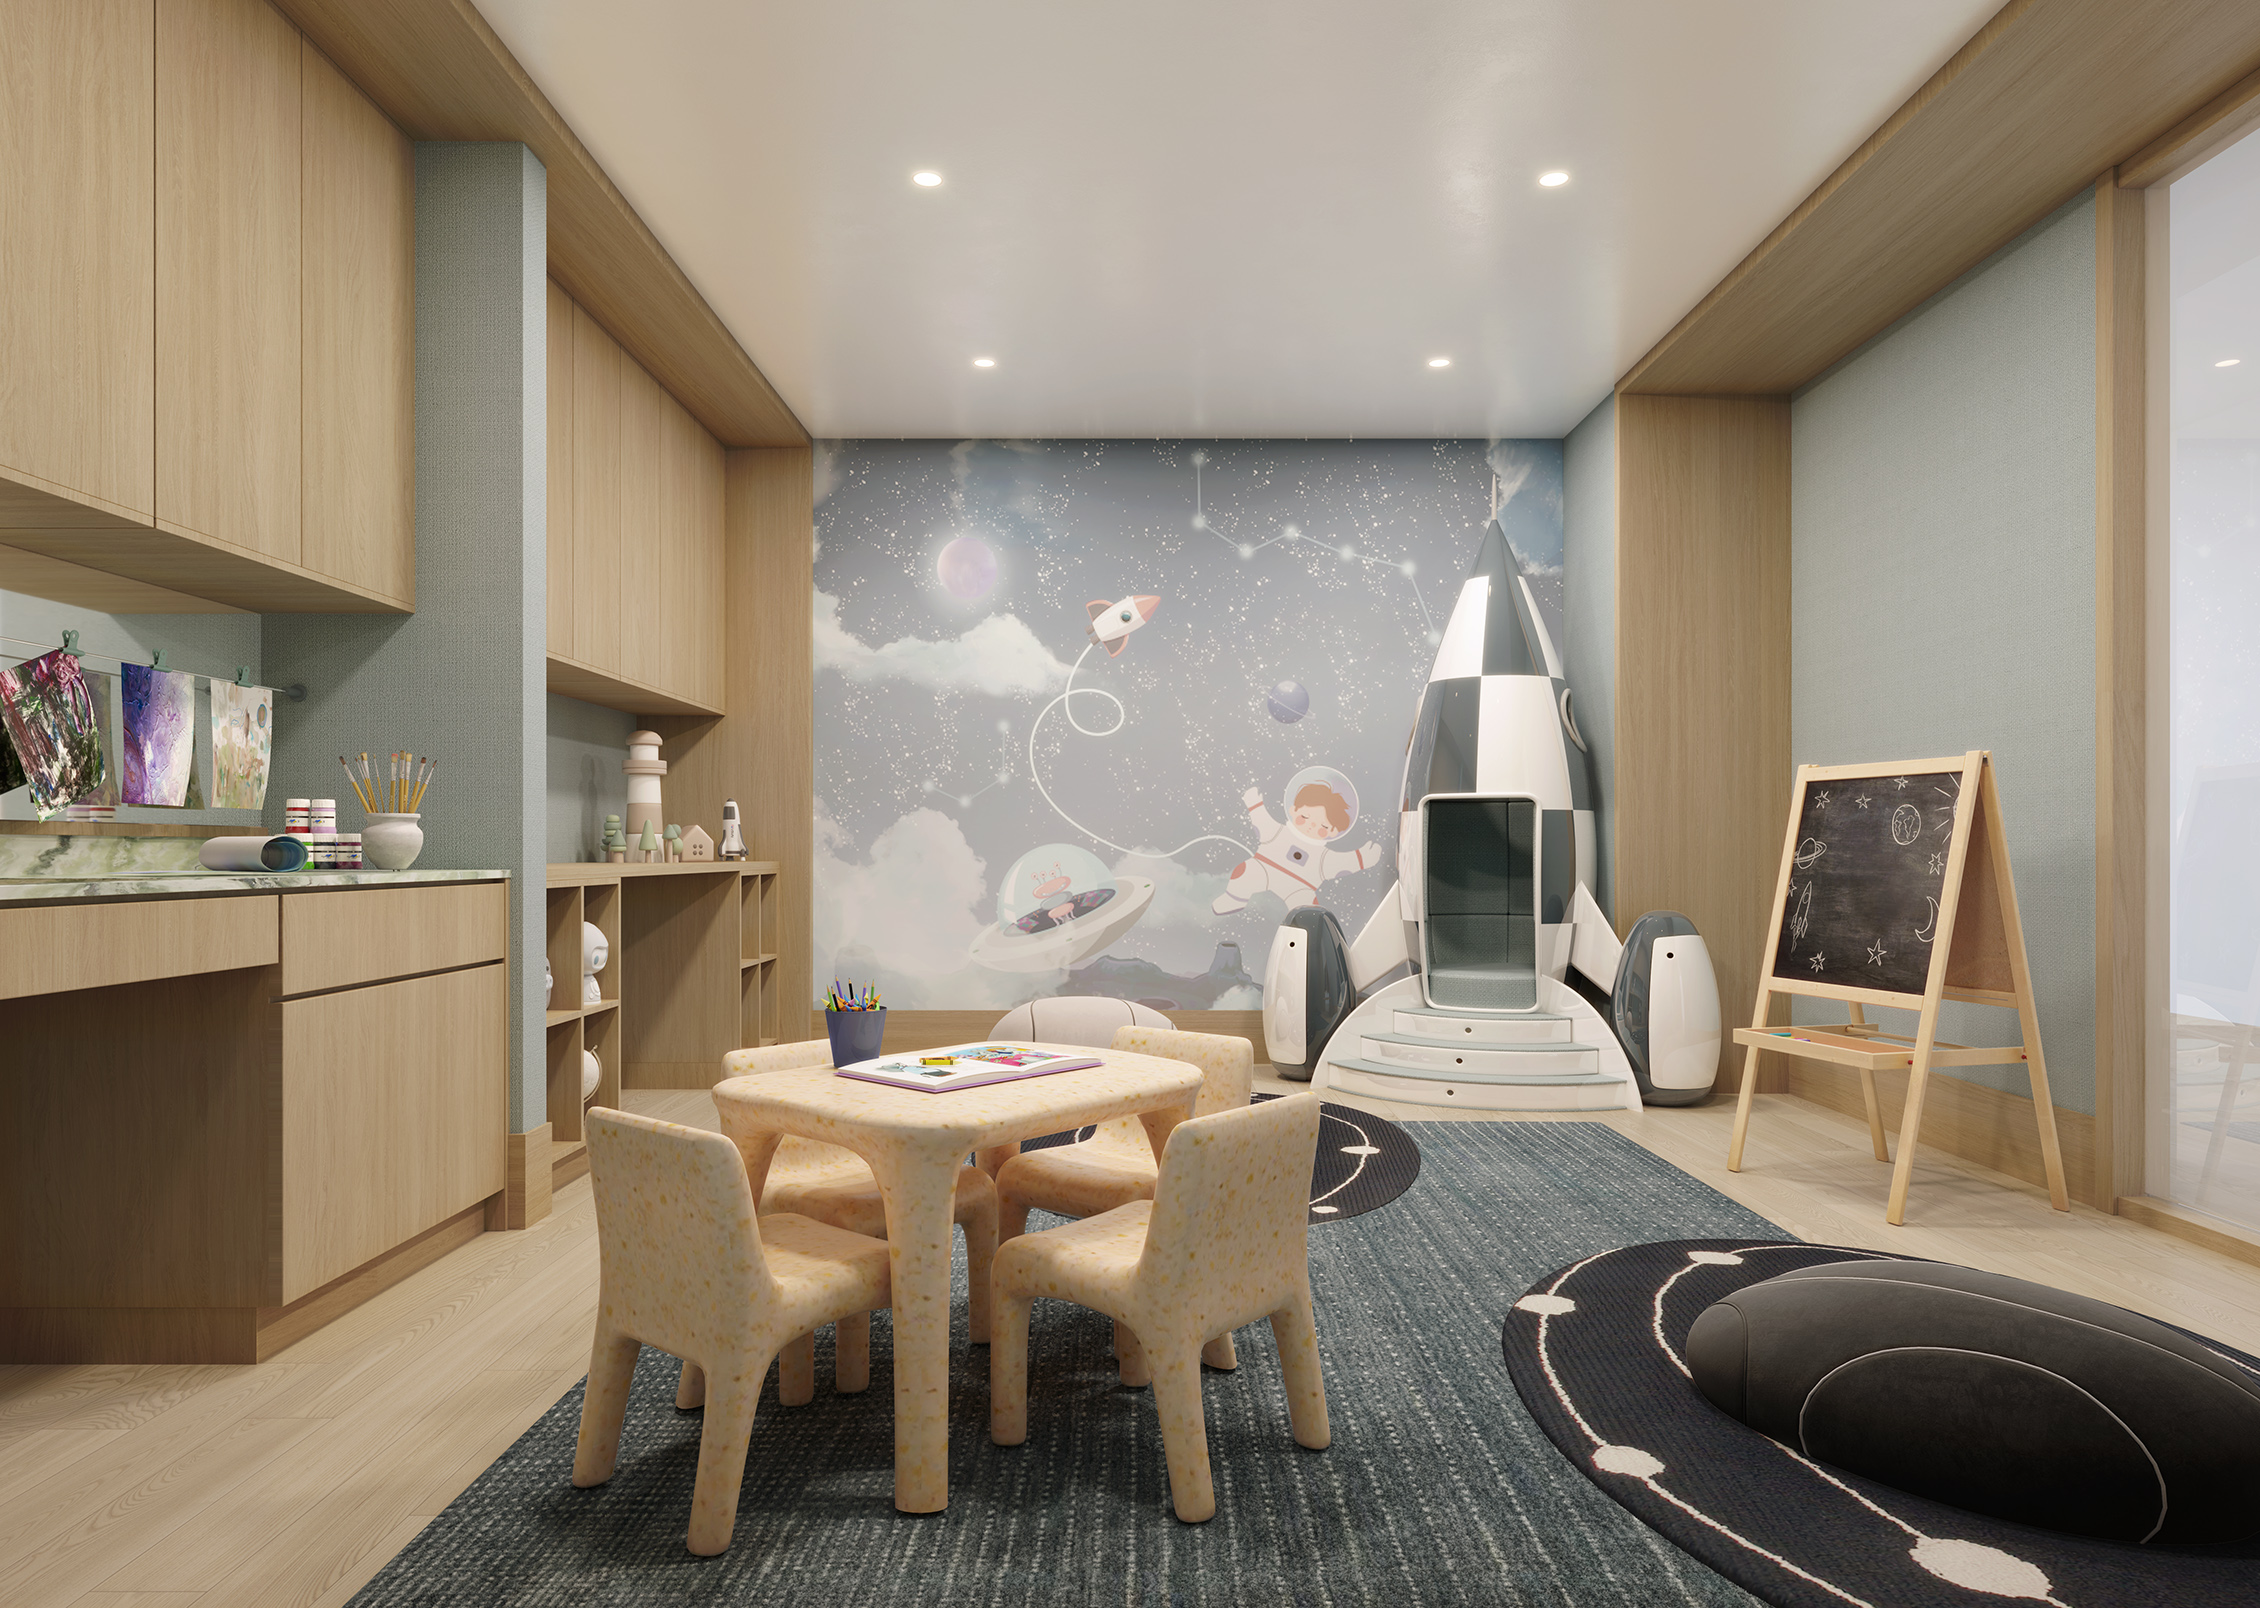 The children's playroom at Chelsea Canvas